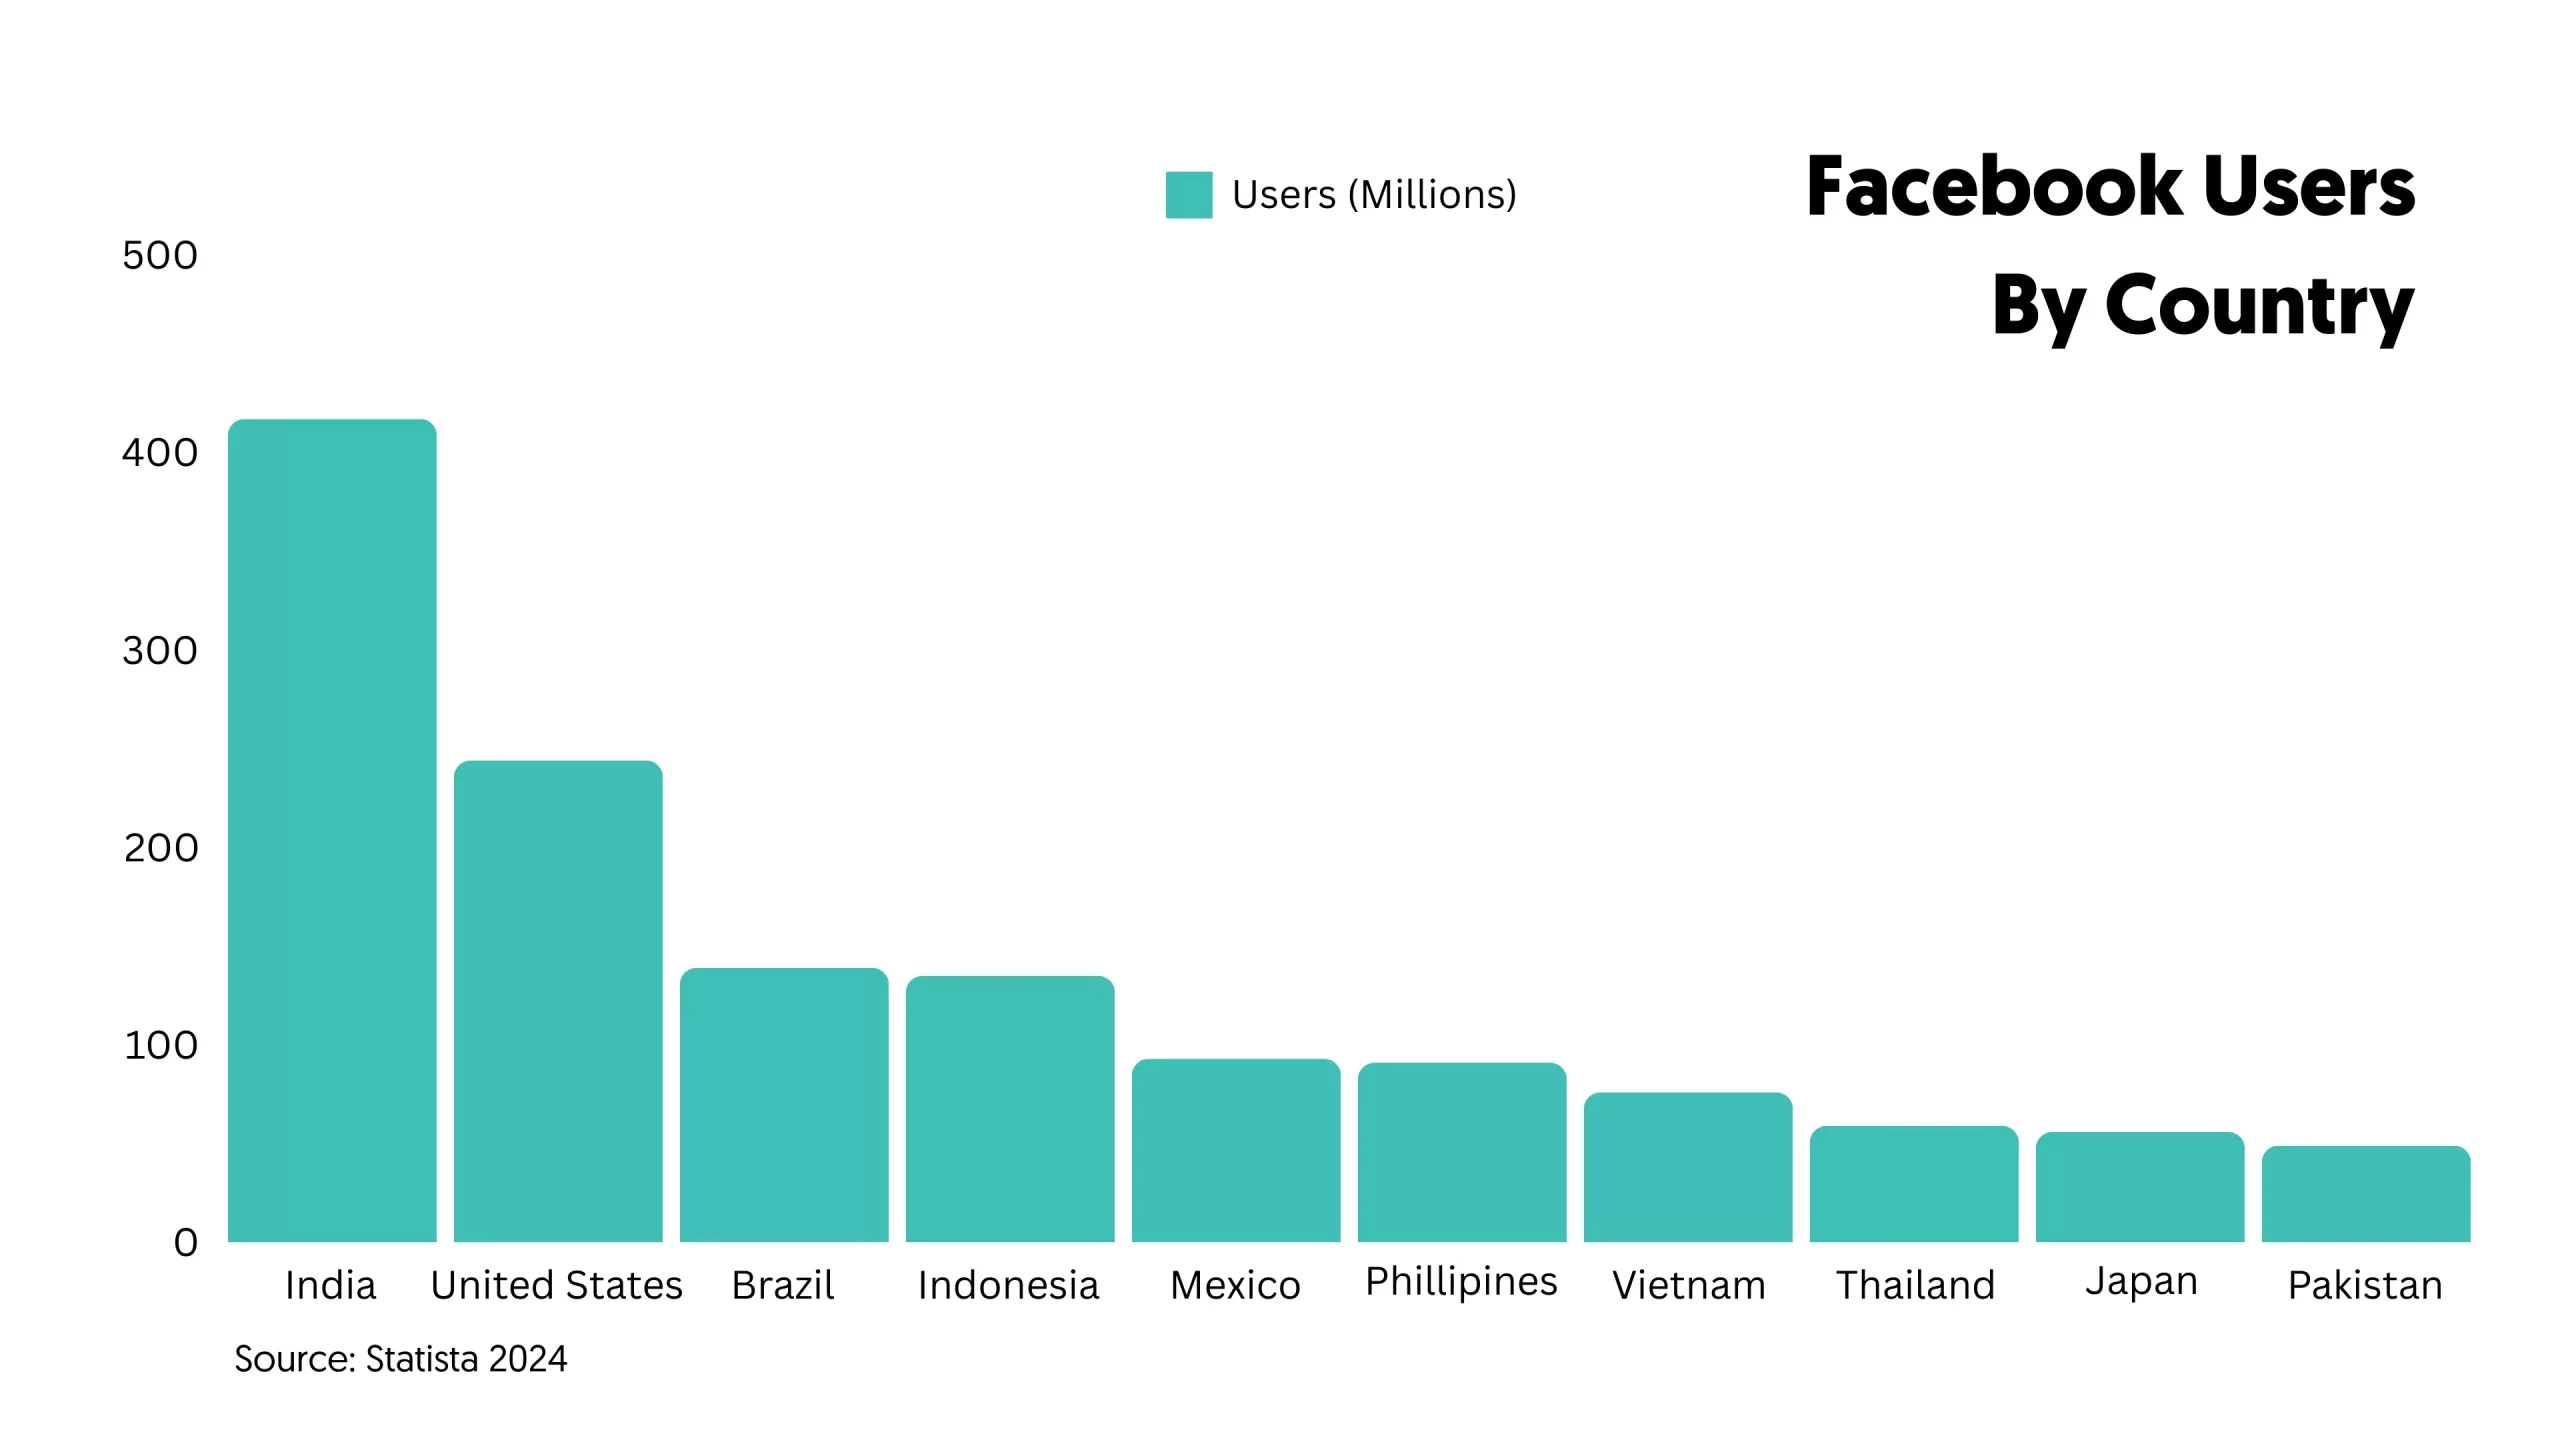 Facebook Users By Country